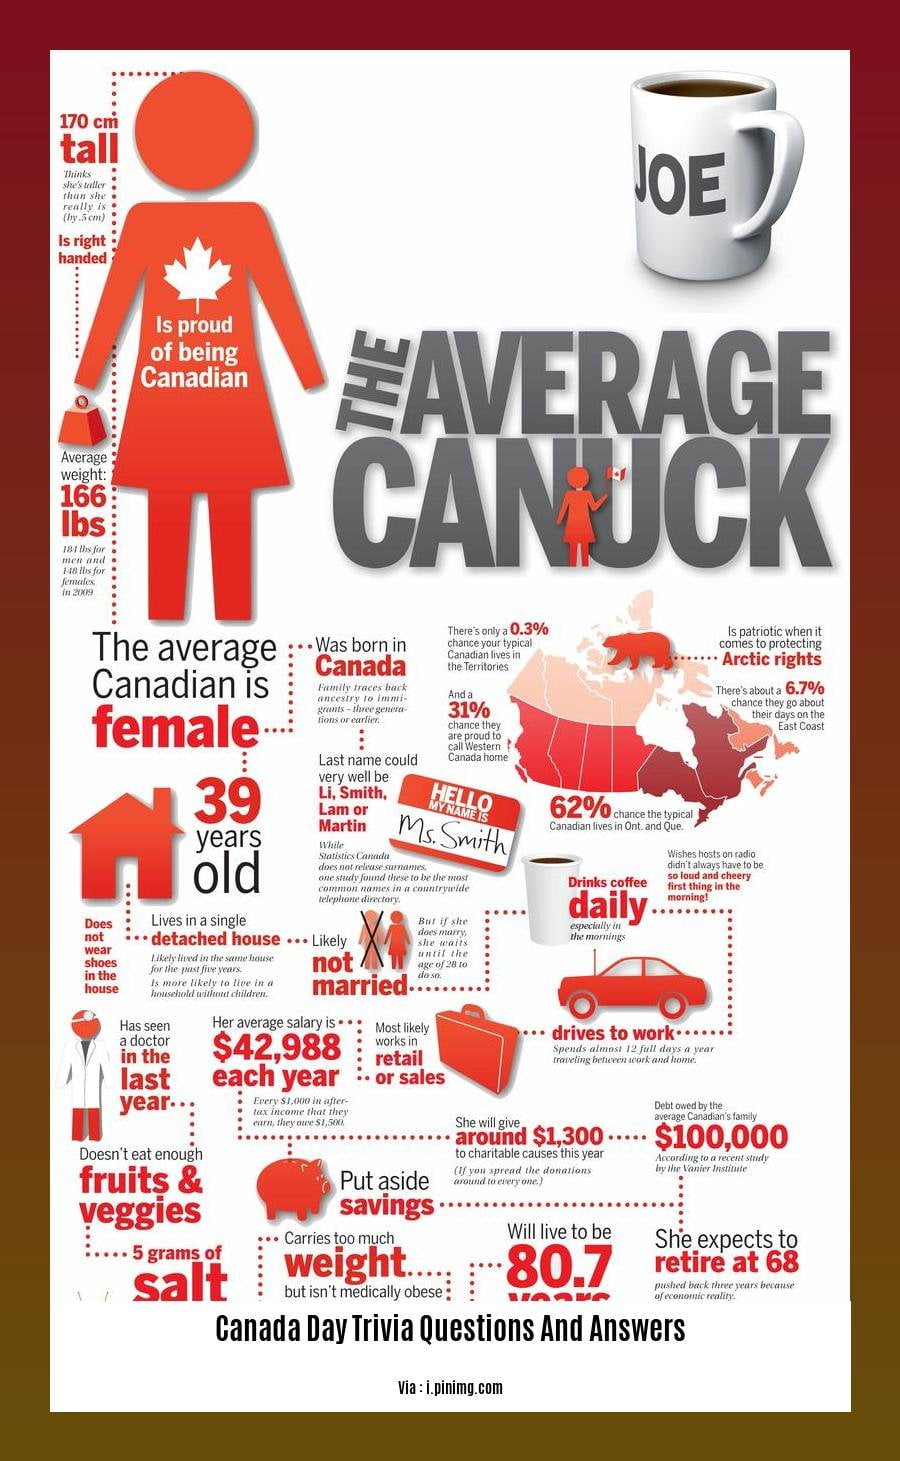 canada day trivia questions and answers